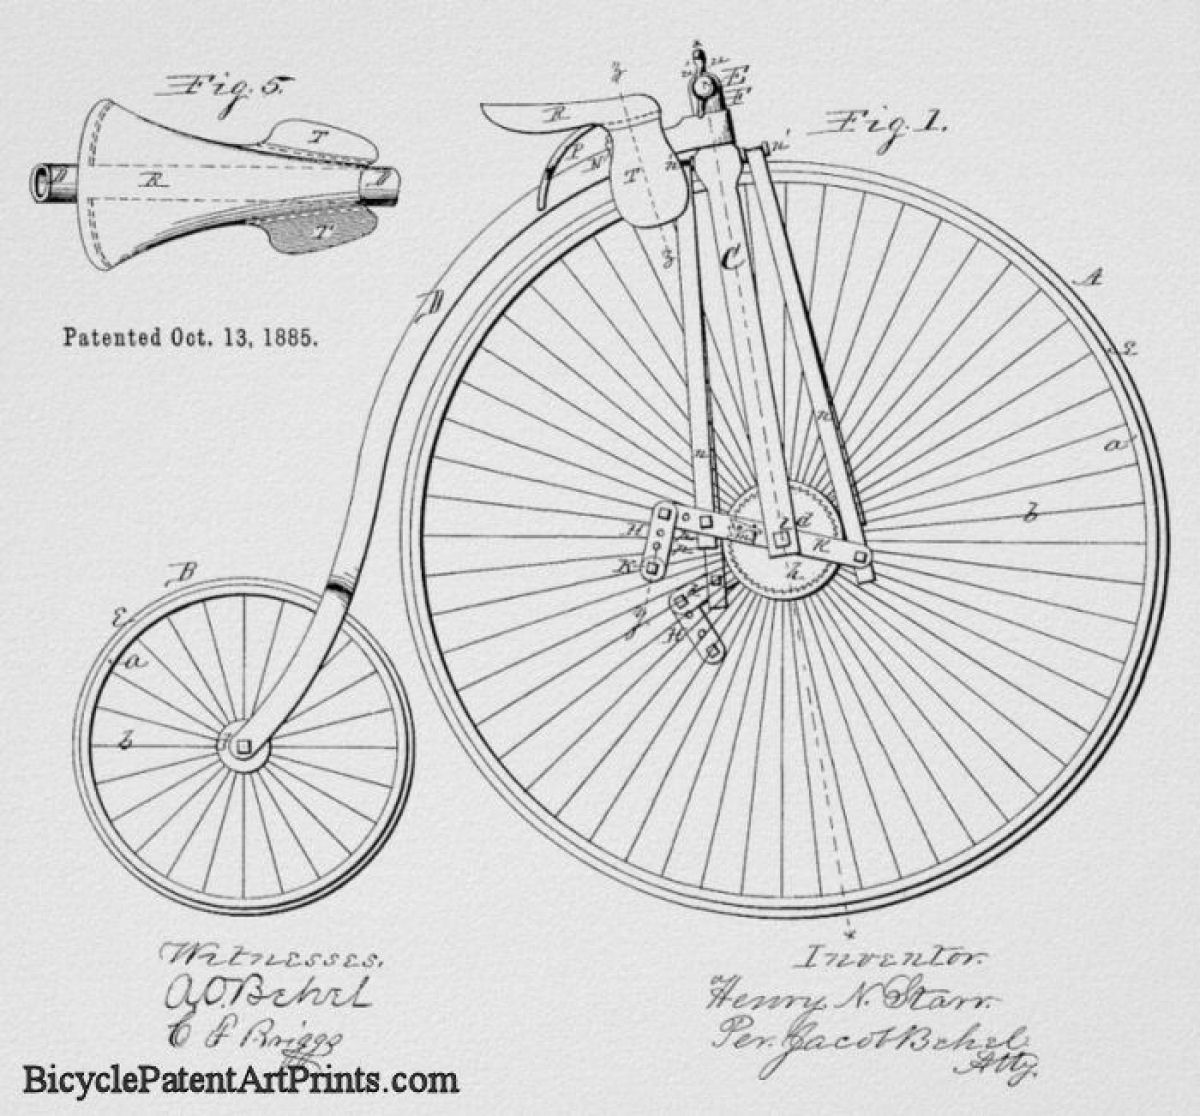 1885 Lever propelled velocipede with leather seat